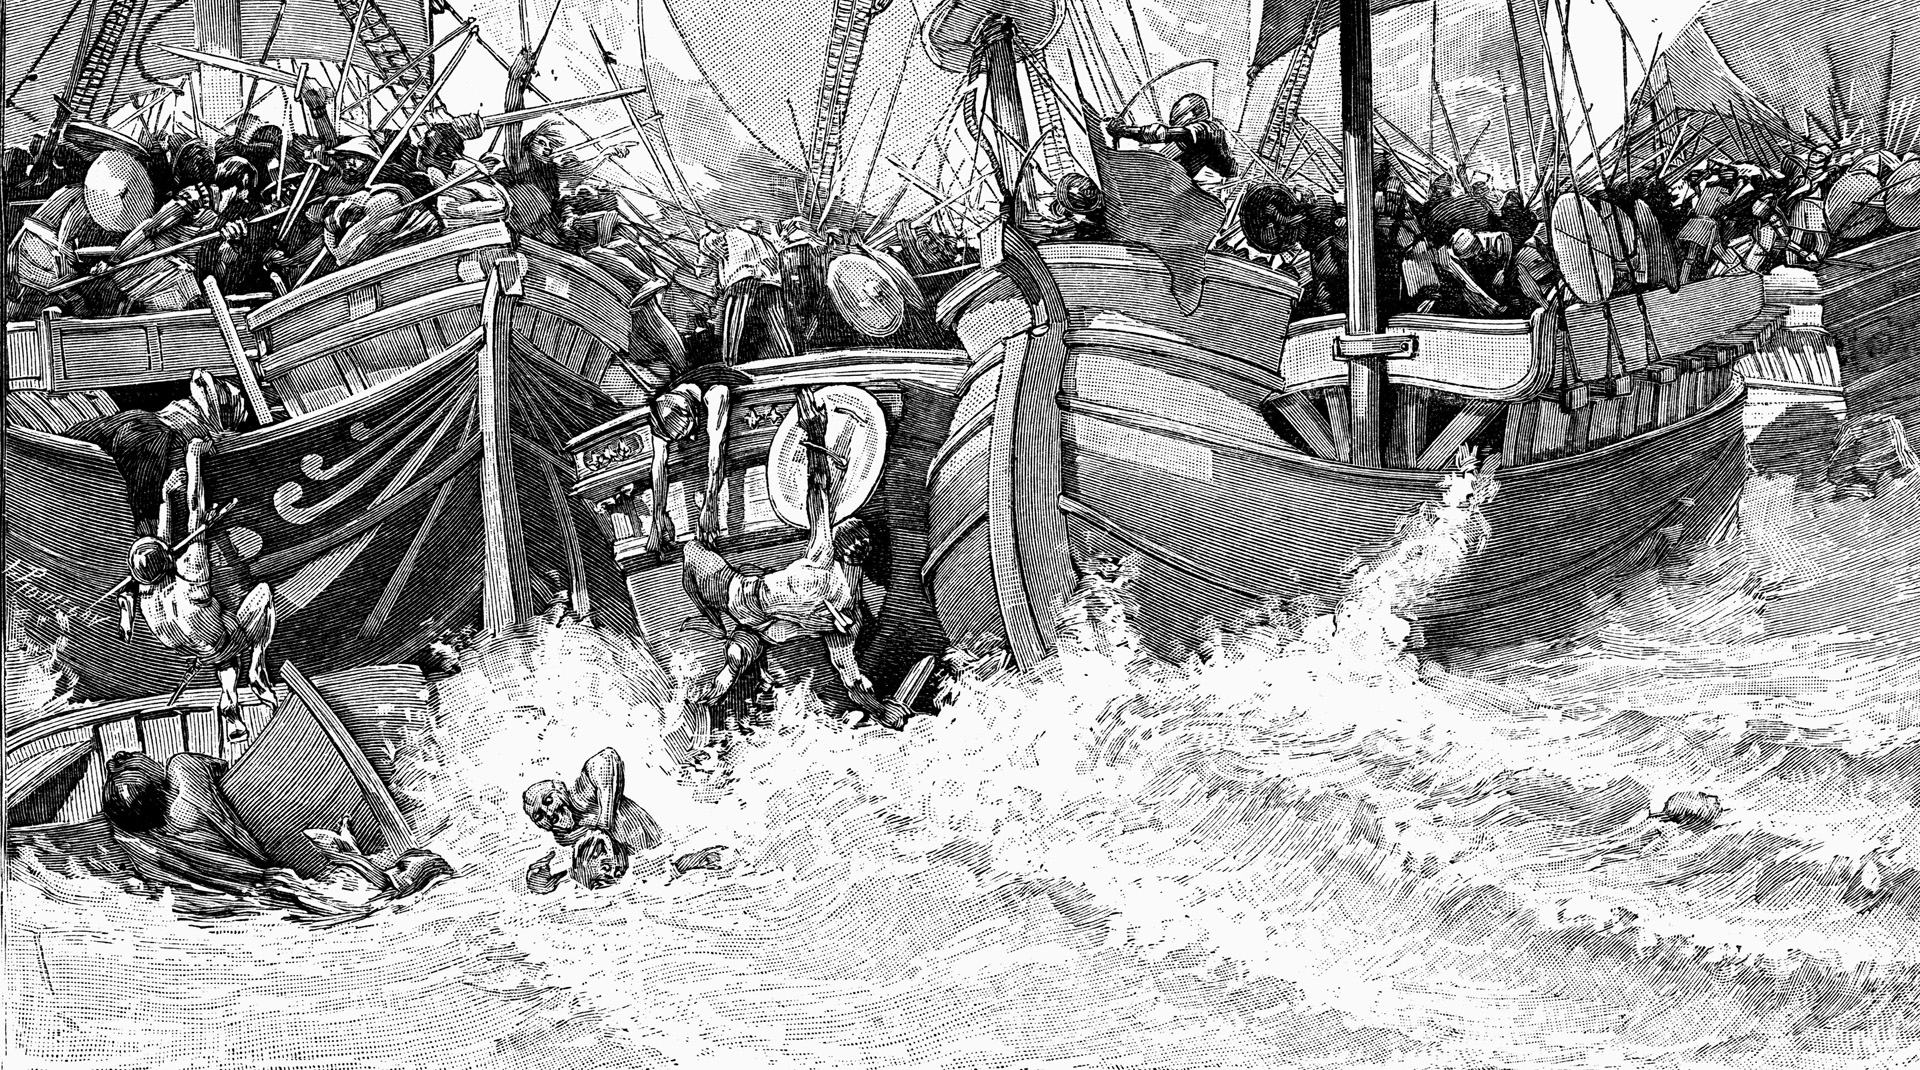 As the tide of battle turned in favor of the English, they slaughtered the remaining French crews and flung their corpses overboard. Both of the French commanders were killed and 190 of their ships captured or sunk.